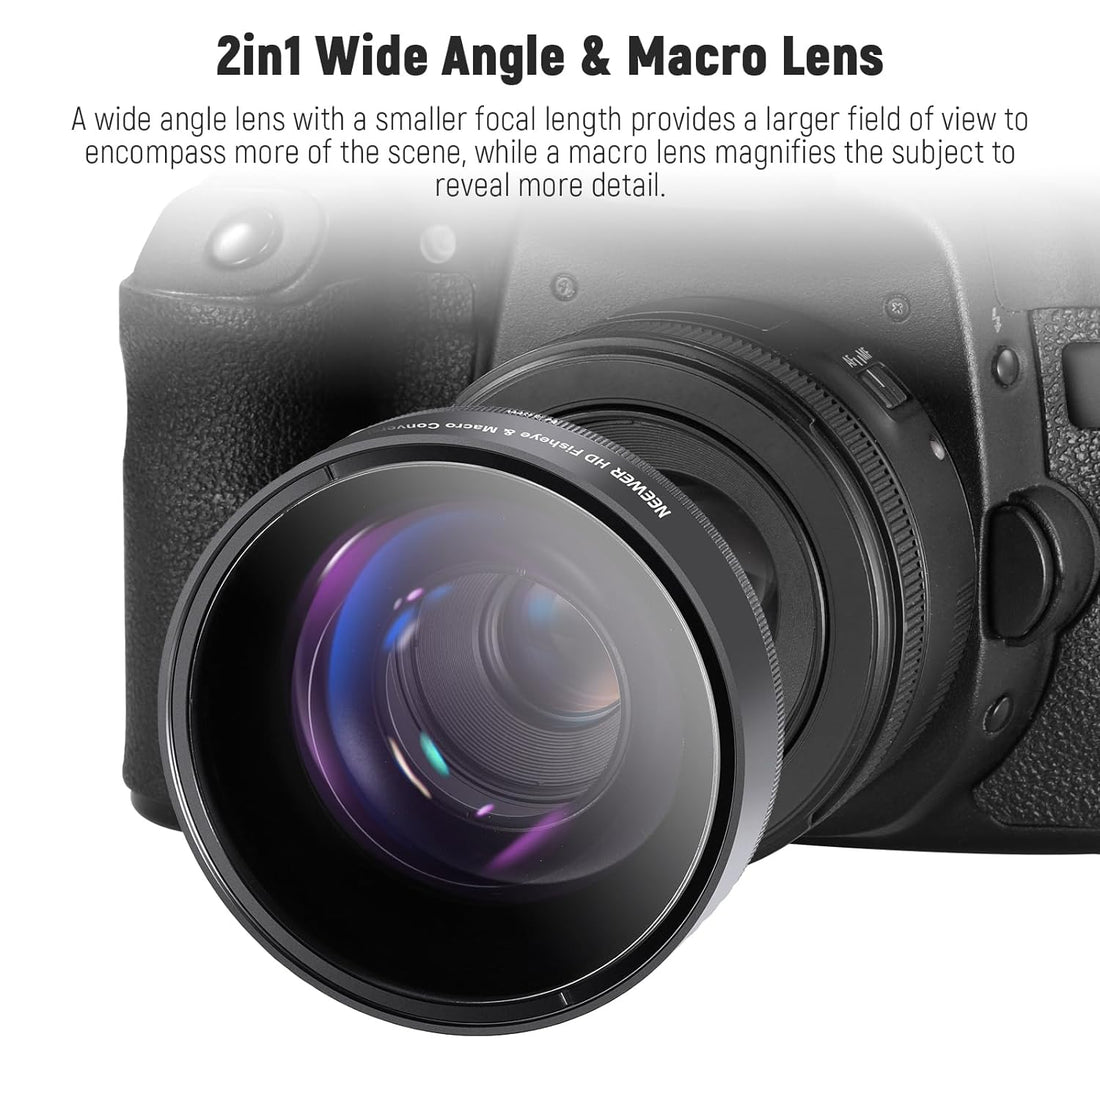 NEEWER 52mm 0.43X HD 2 in 1 Wide Angle & Macro Lens, Ultra Wide Angle Lens with 18mm Focal Length Compatible with Canon T7 M50 90D M6 MarkII Nikon D780 D850 Z50 Z fc Fujifilm X-T4 X-T3 X-T30, LS-20